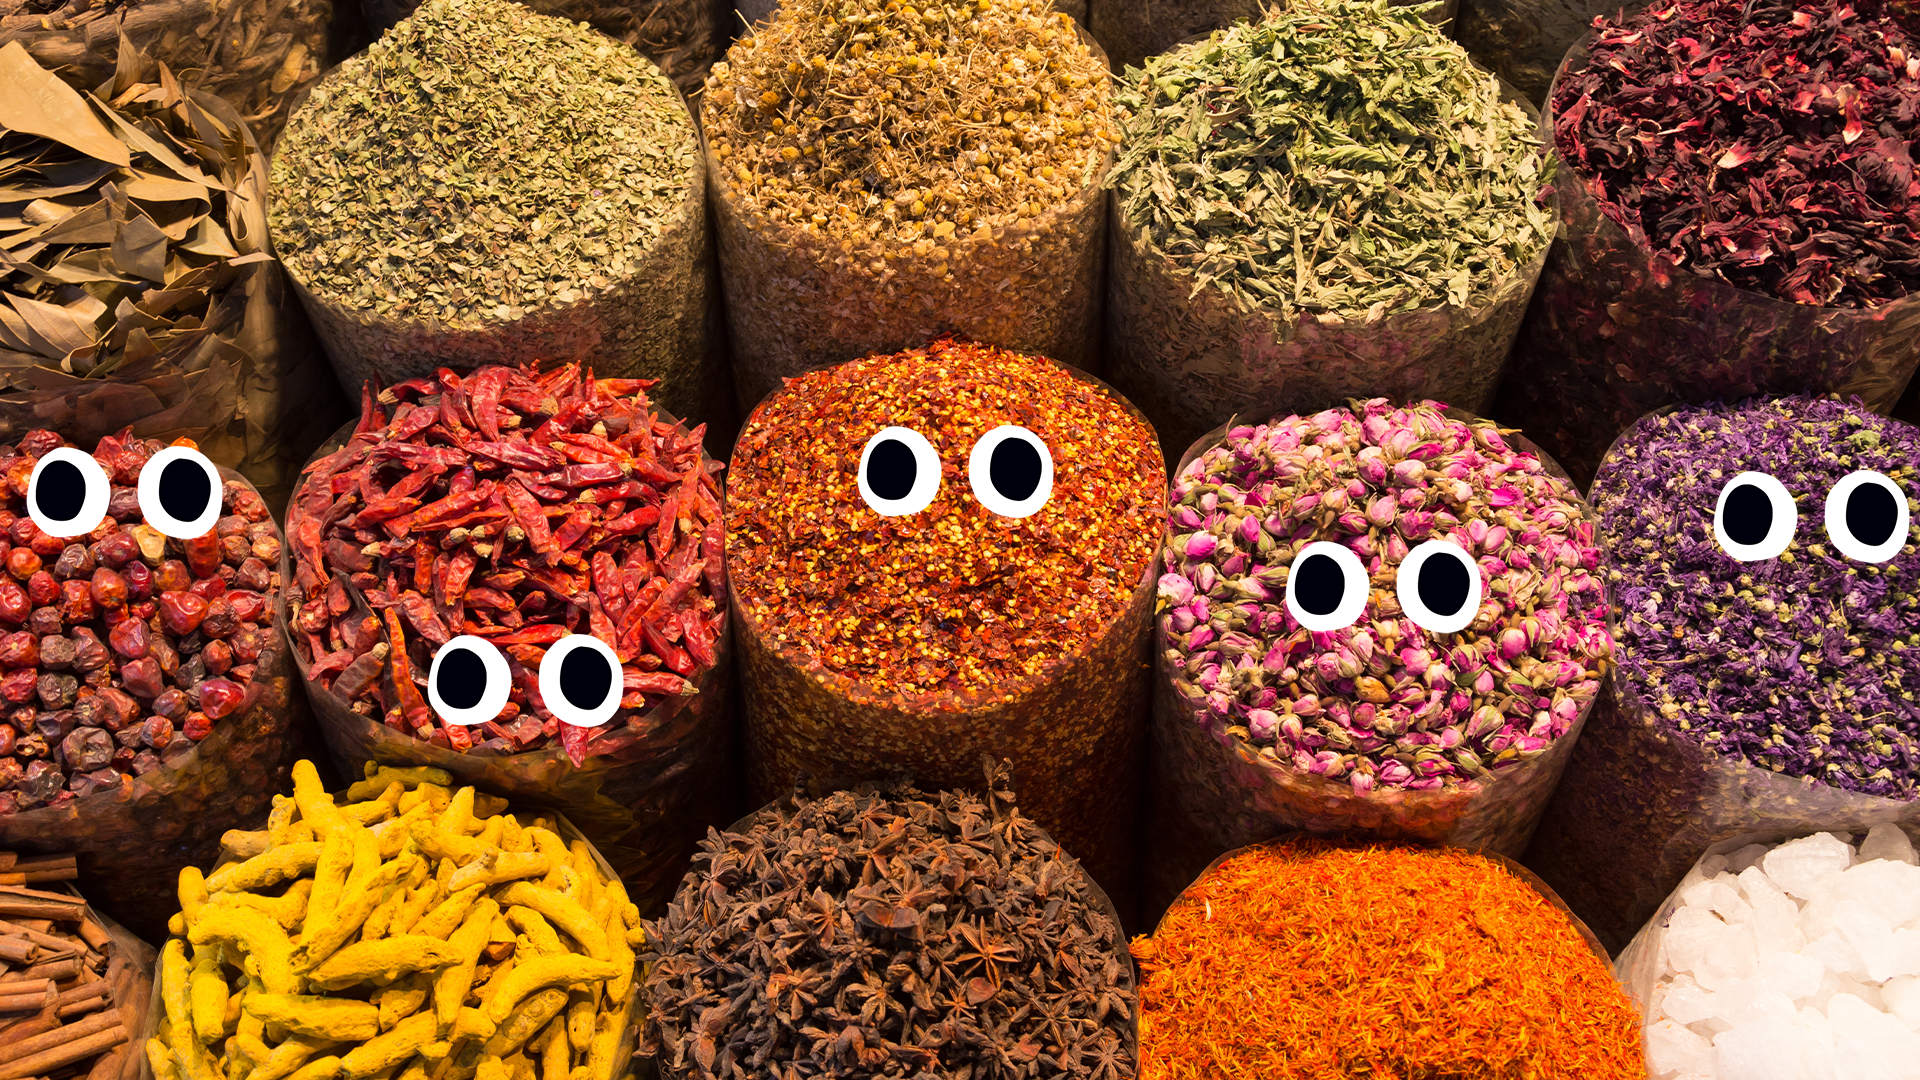 Piles of spices with eyes